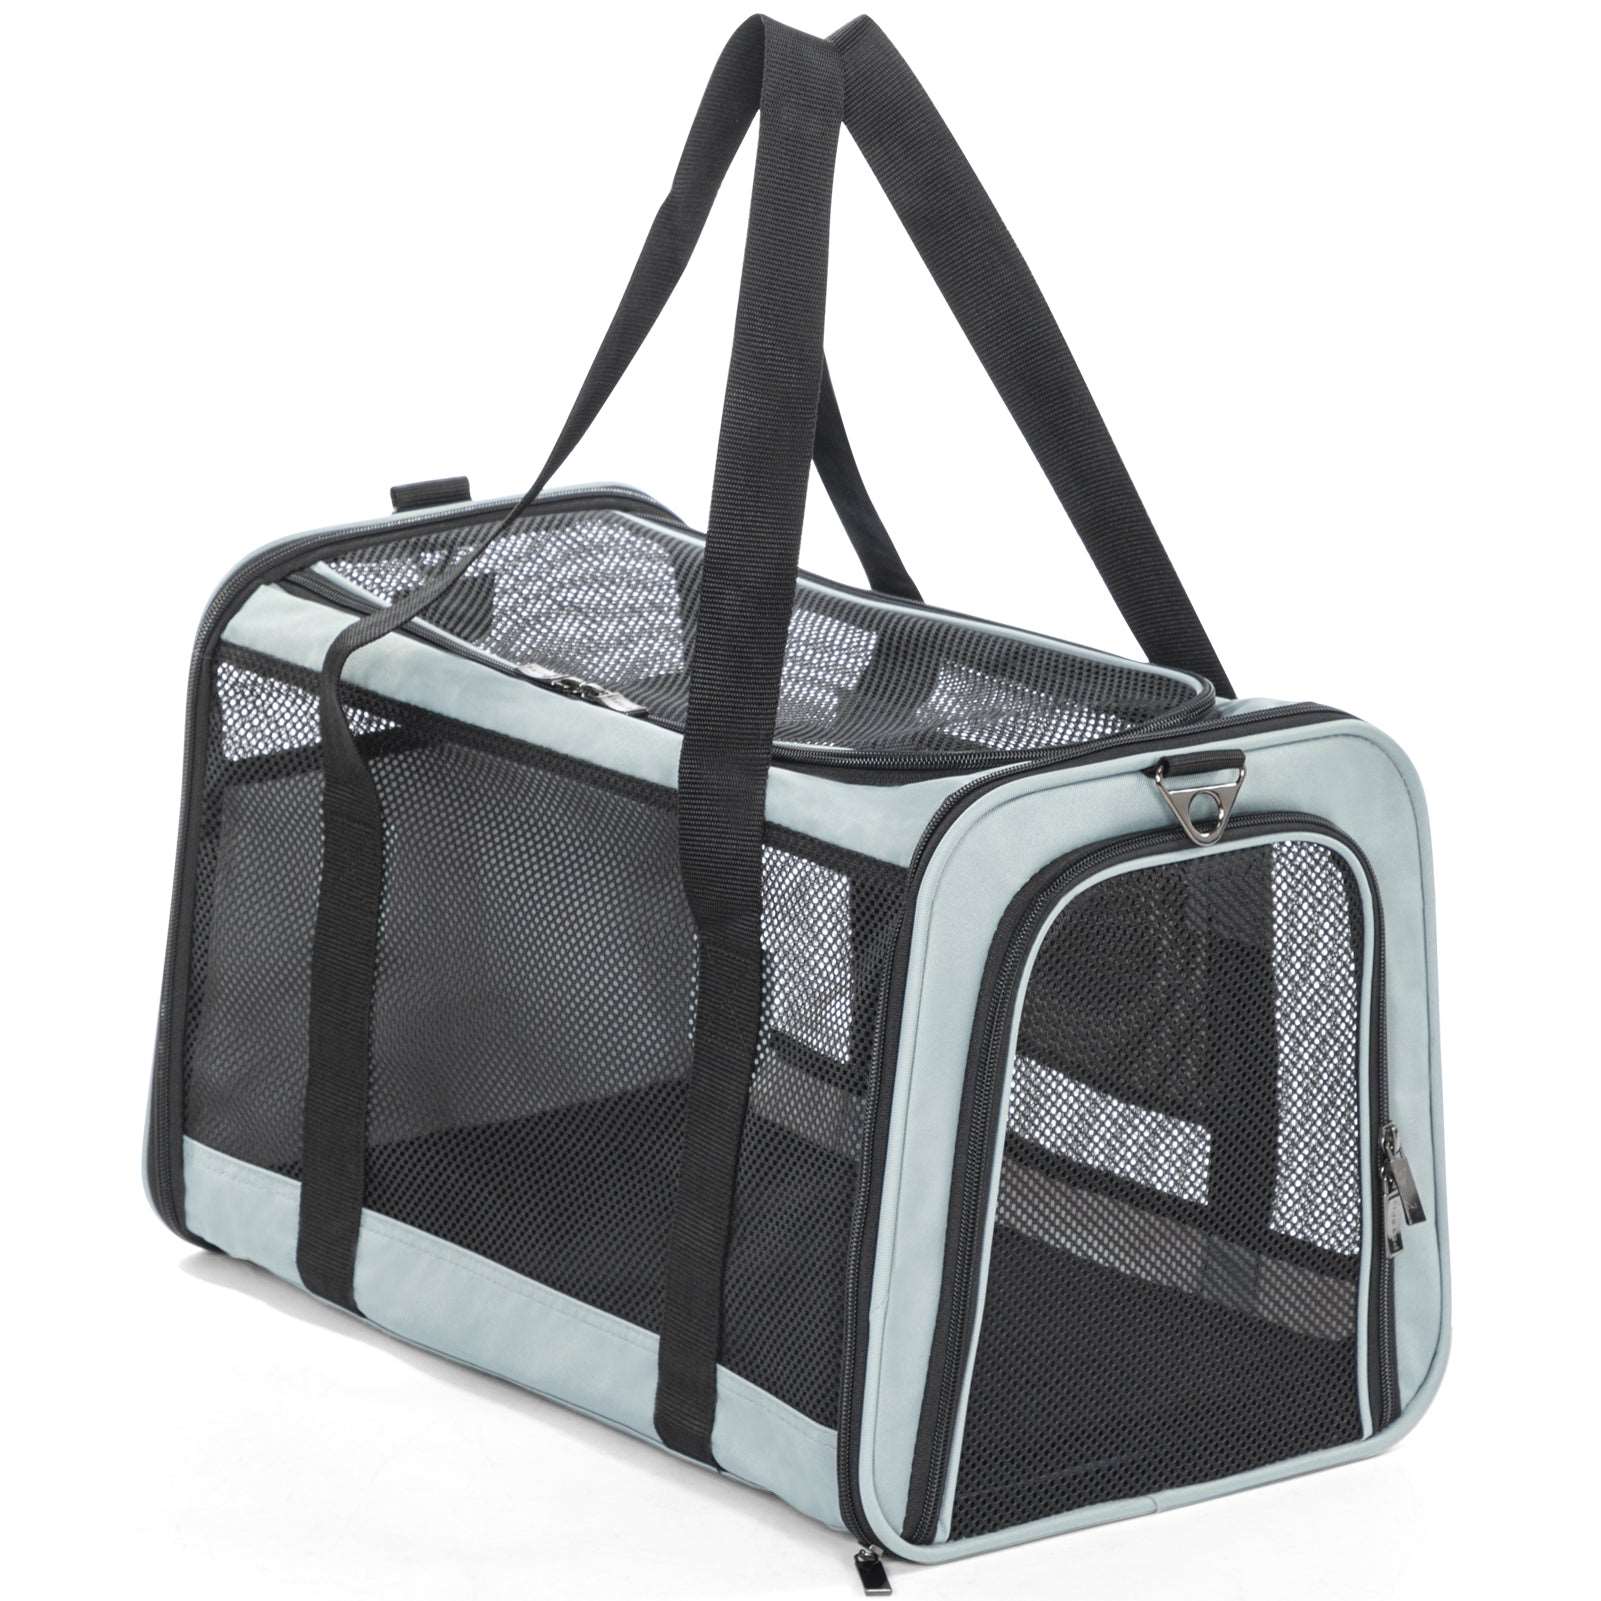 Petsfit-Large-Capacity-Lightweight-Washable-Soft-Sided-Pet-Travel-Carrier-11